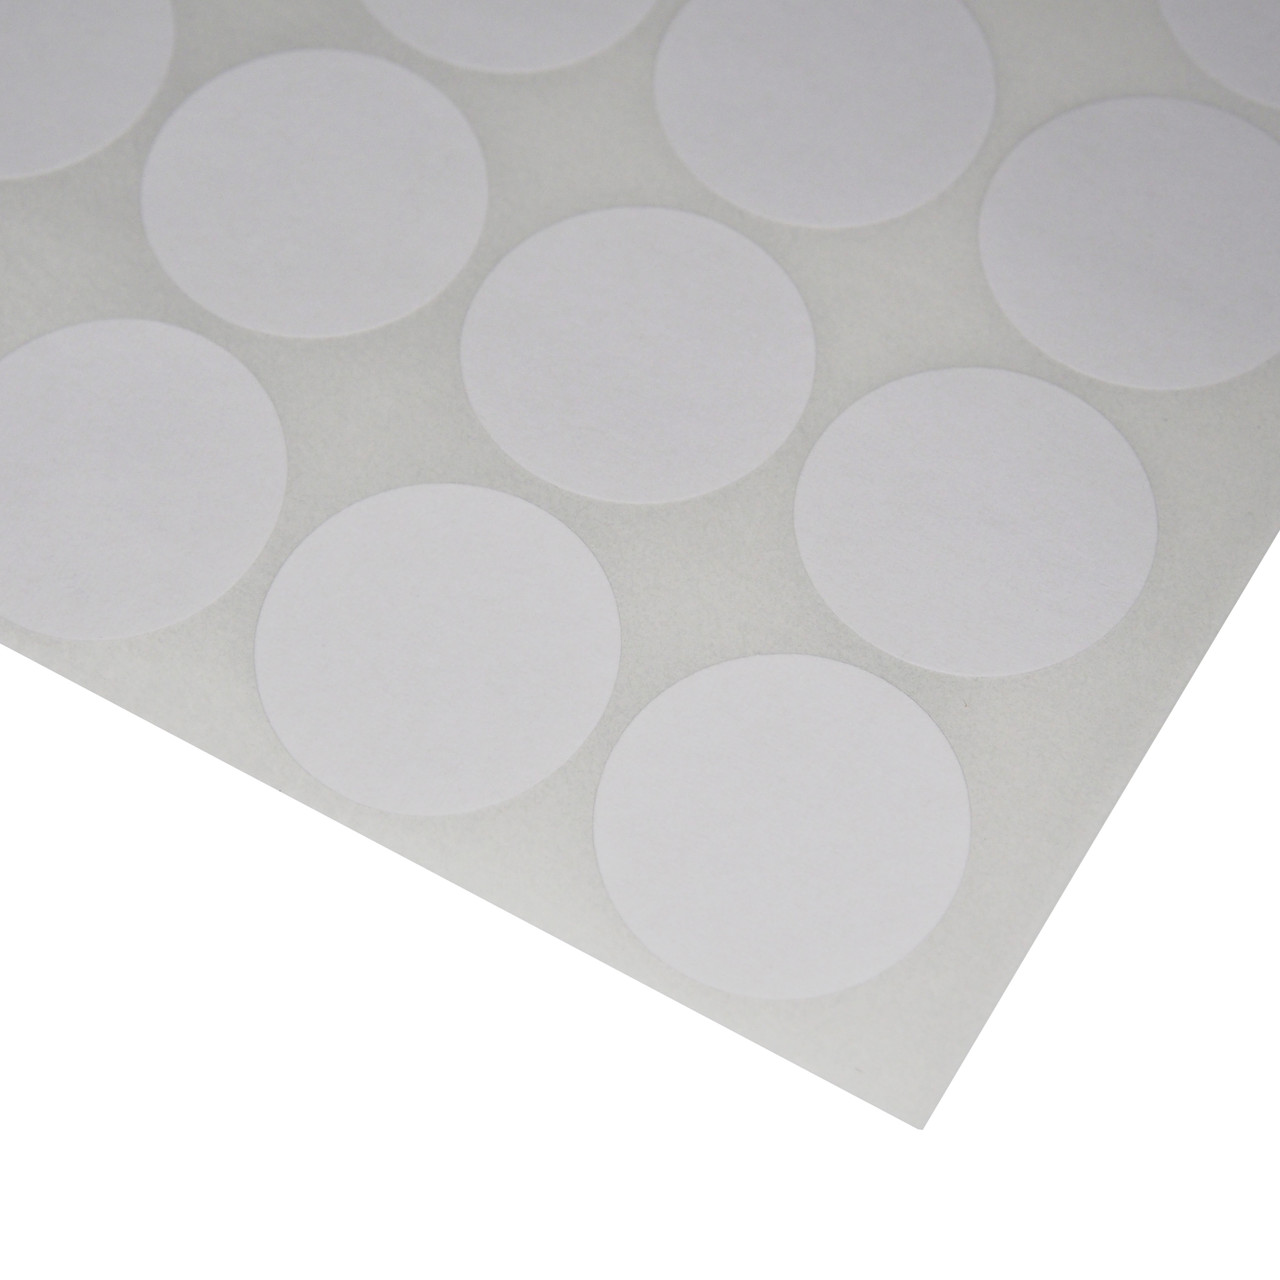 Sticky Labels Blank White Price Point Stickers Tags Circles Rectangles 